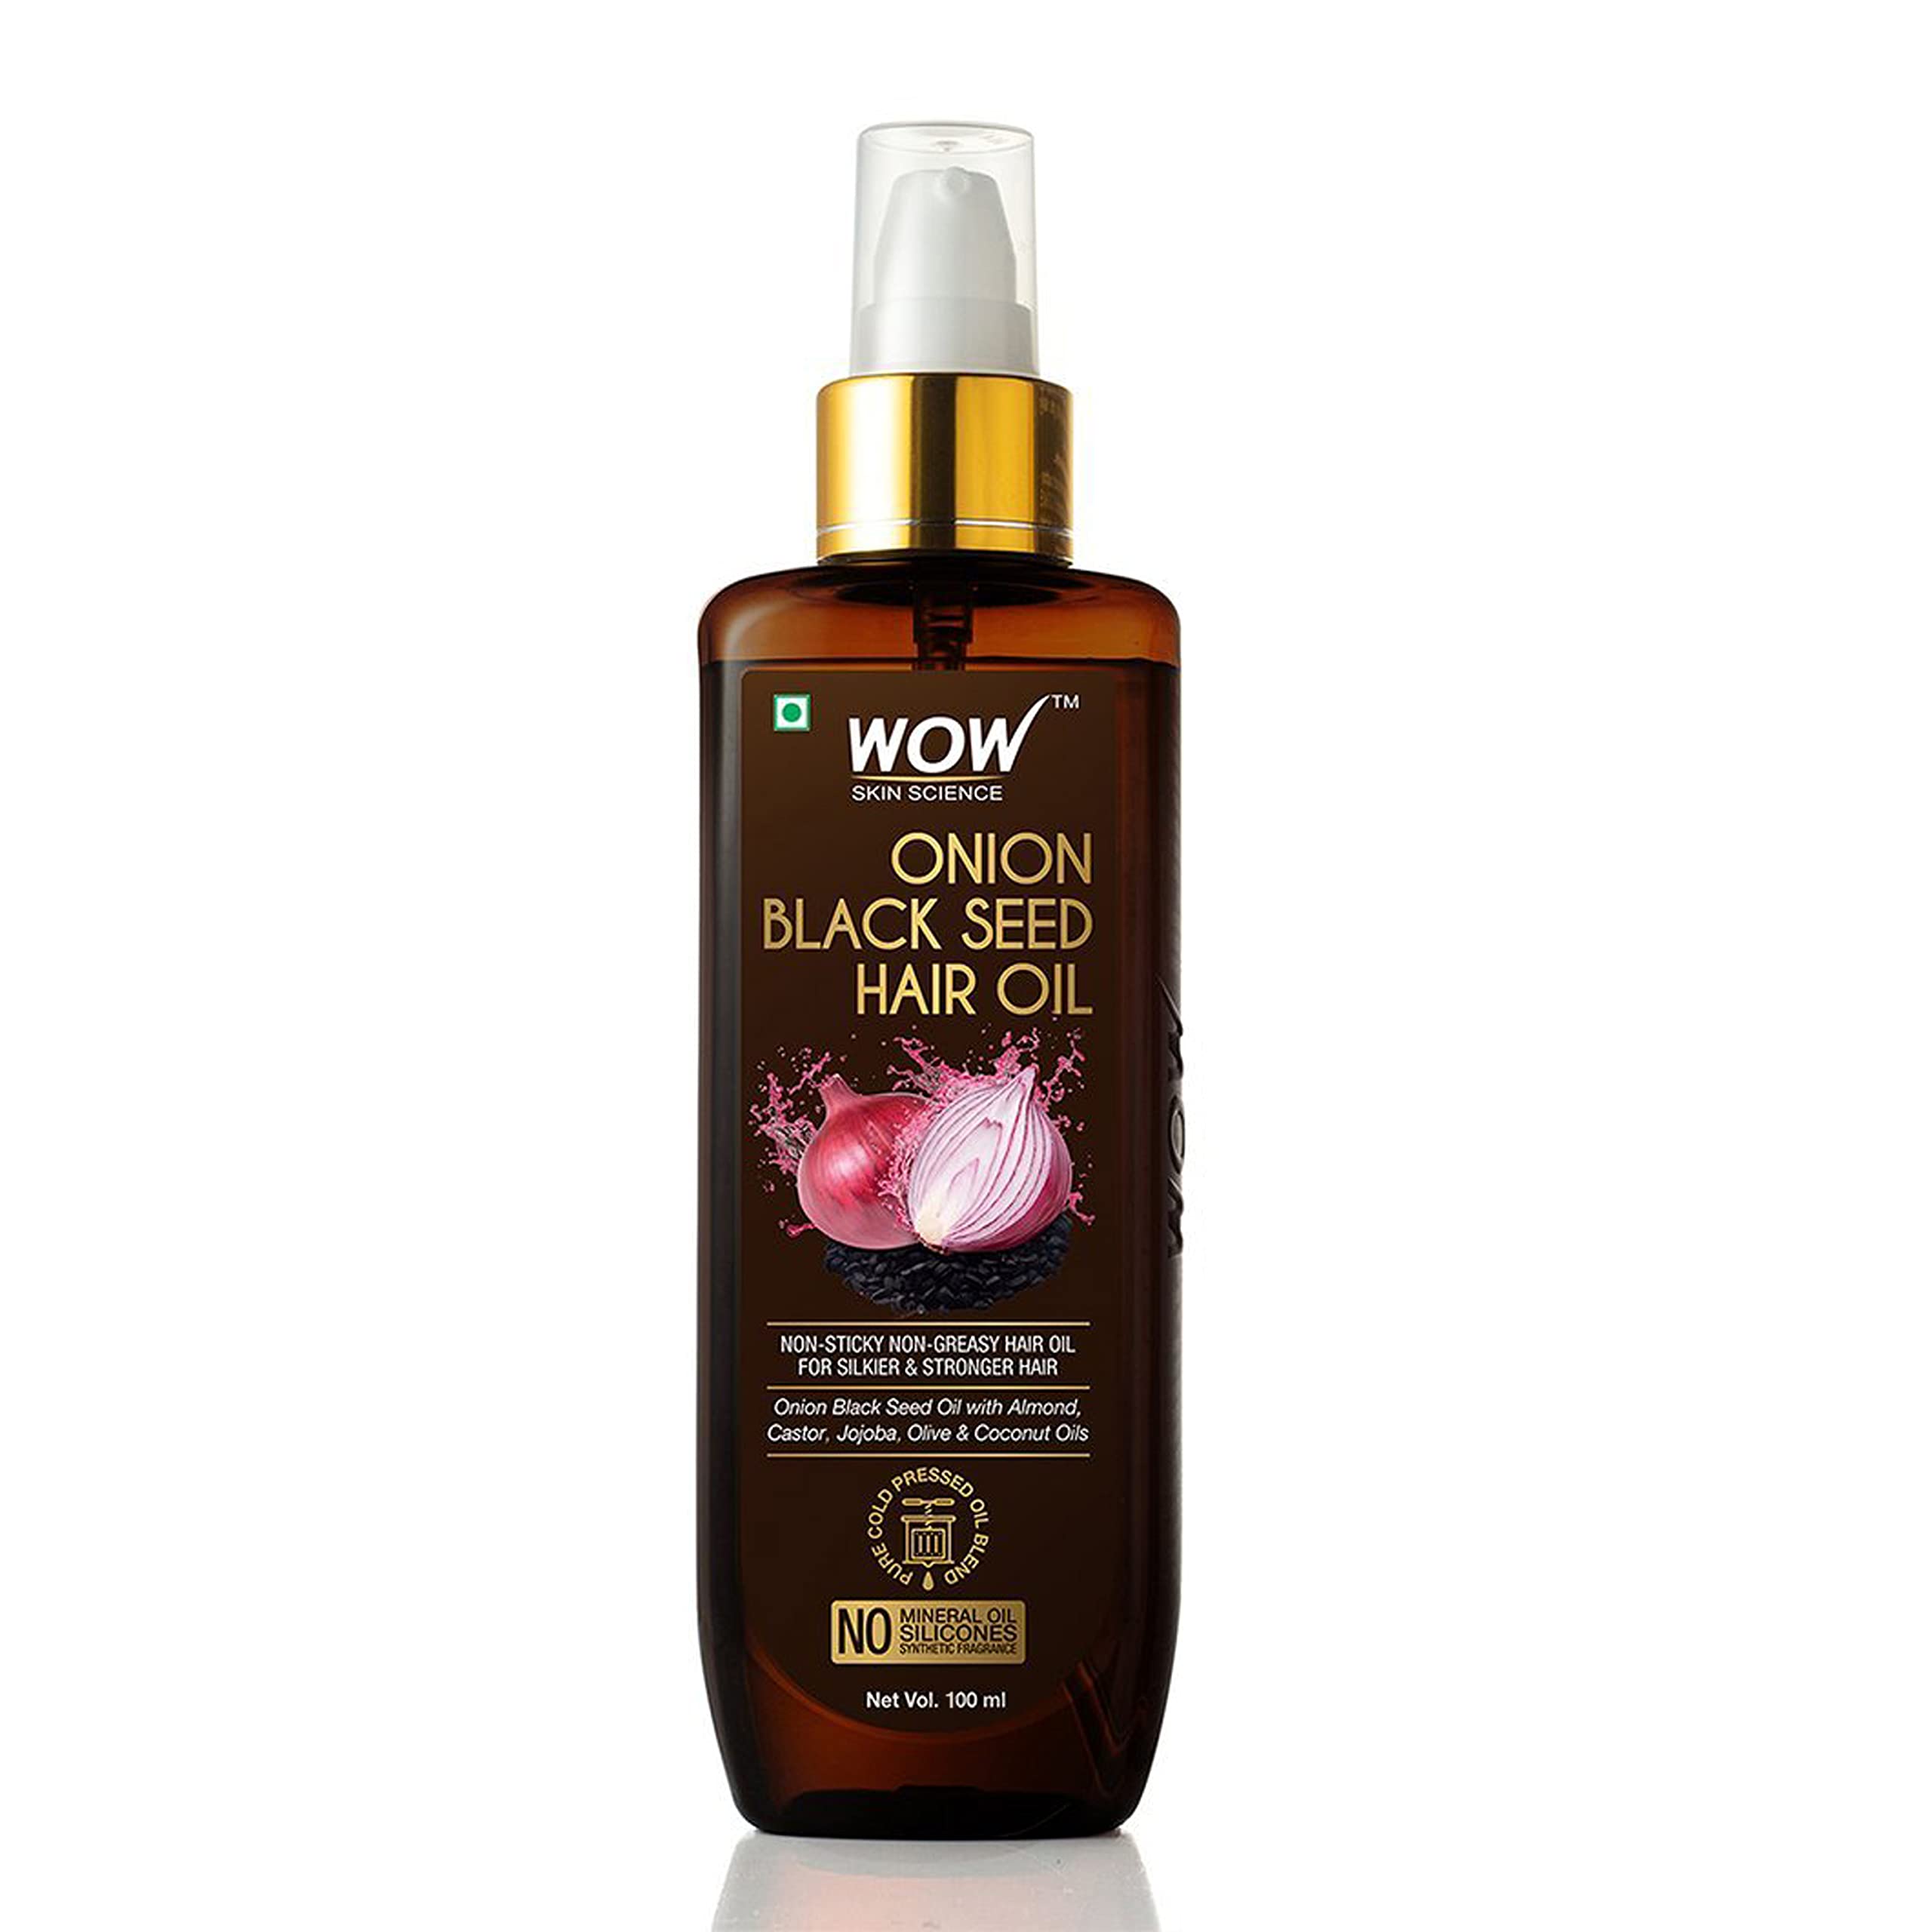 WOW Skin Science Onion Black Seed Hair Oil for Dry Damaged Hair & Growth - Oil Hair Care Strong Hair Growth Oil - Hair Treatment for Dry Damaged Hair with Almond, Castor, Olive, Coconut & Jojoba Oil (3.4 Fl Oz (Pack of 1))